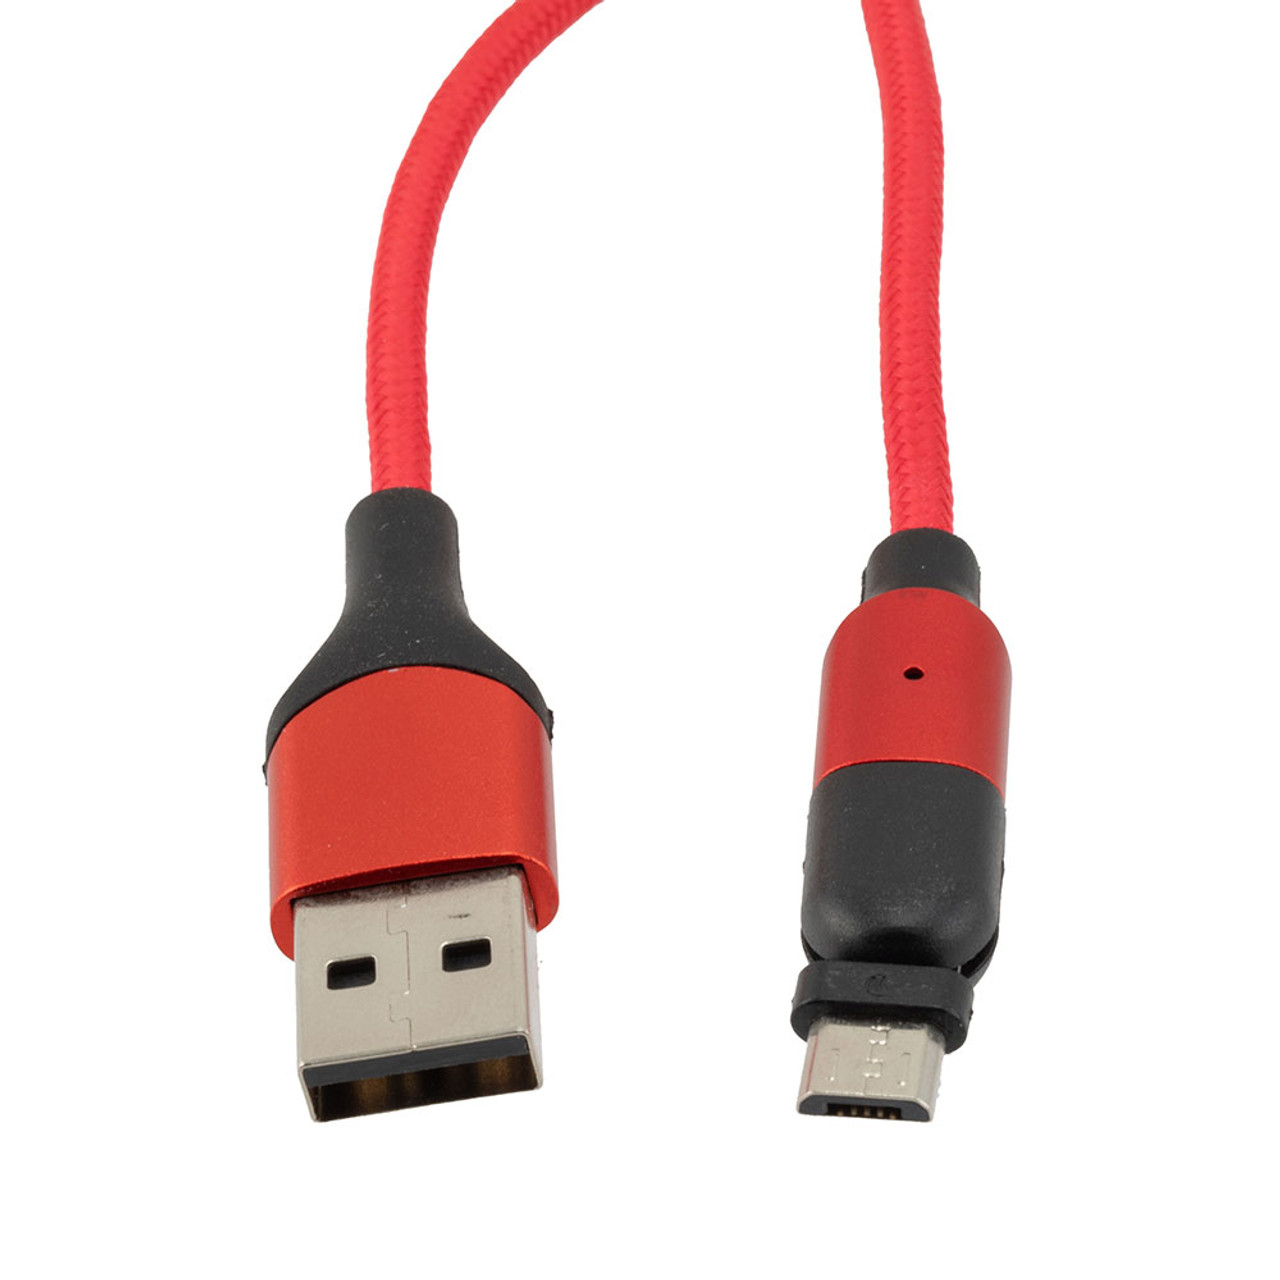 NavePoint USB 2.0 180-degree Rotating Head PVC Nylon Braided Cable, Red, USB A Male to USB Micro Male, 1 Meter 